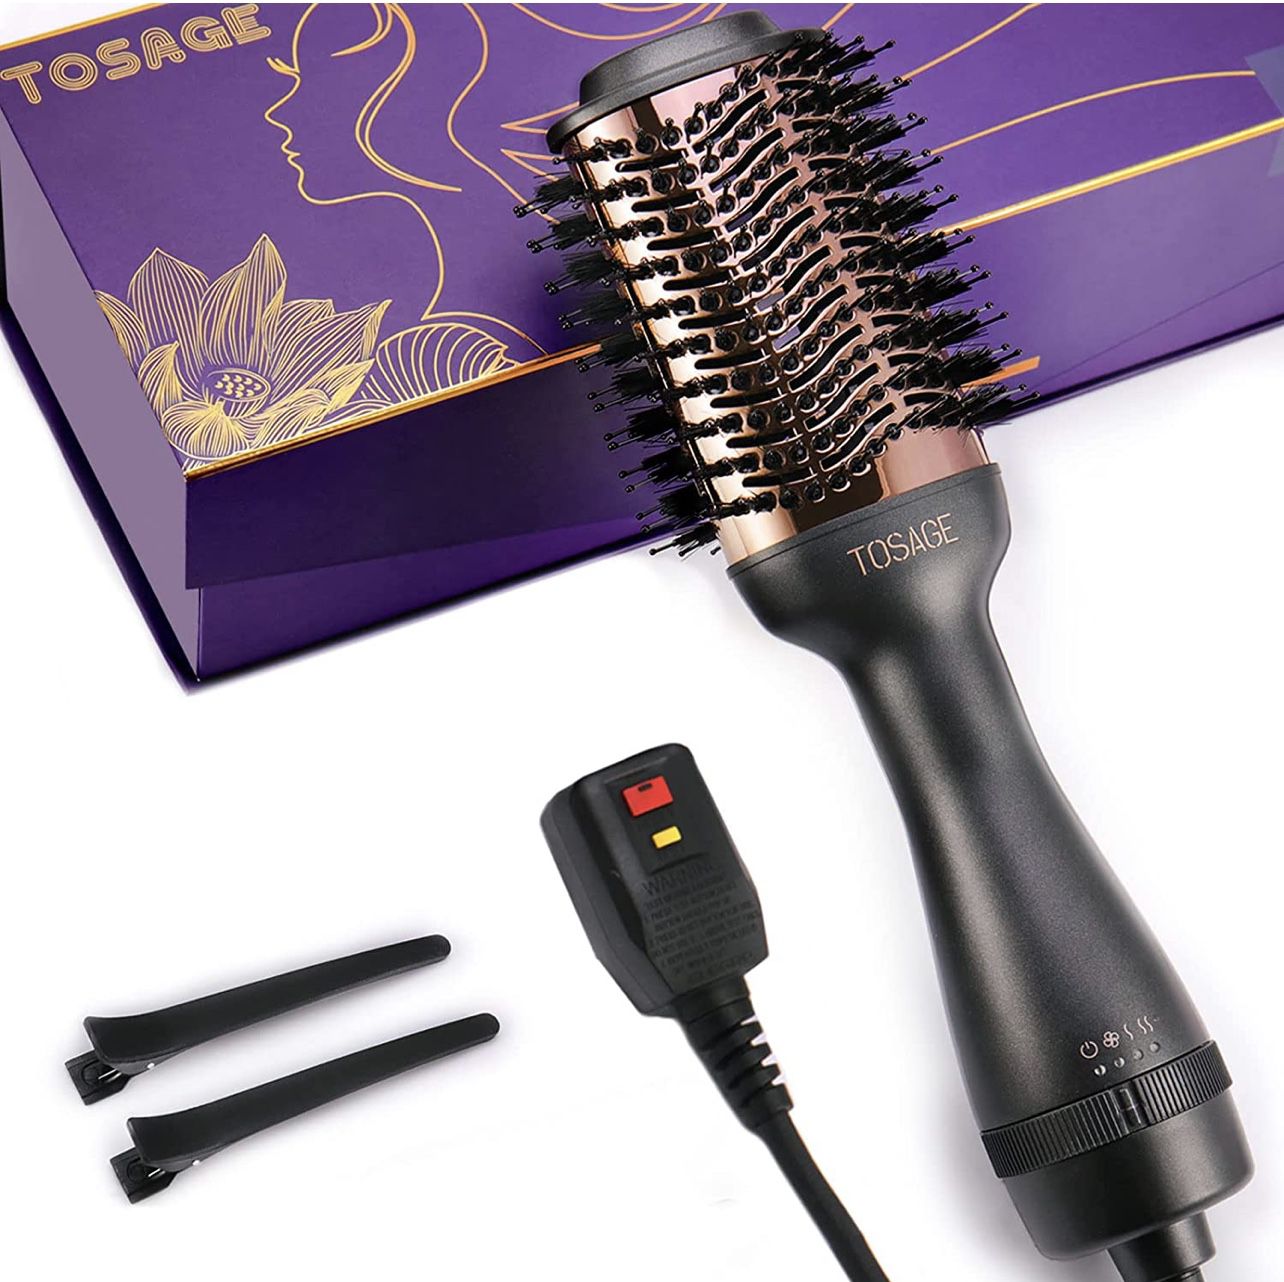 TOSAGE Hair Dryer Brush, One-Step Dryer and Volumizer, Professional Hot Air Brush with Titanium Barrel and Ionic Technology for Blow Drying Straighten